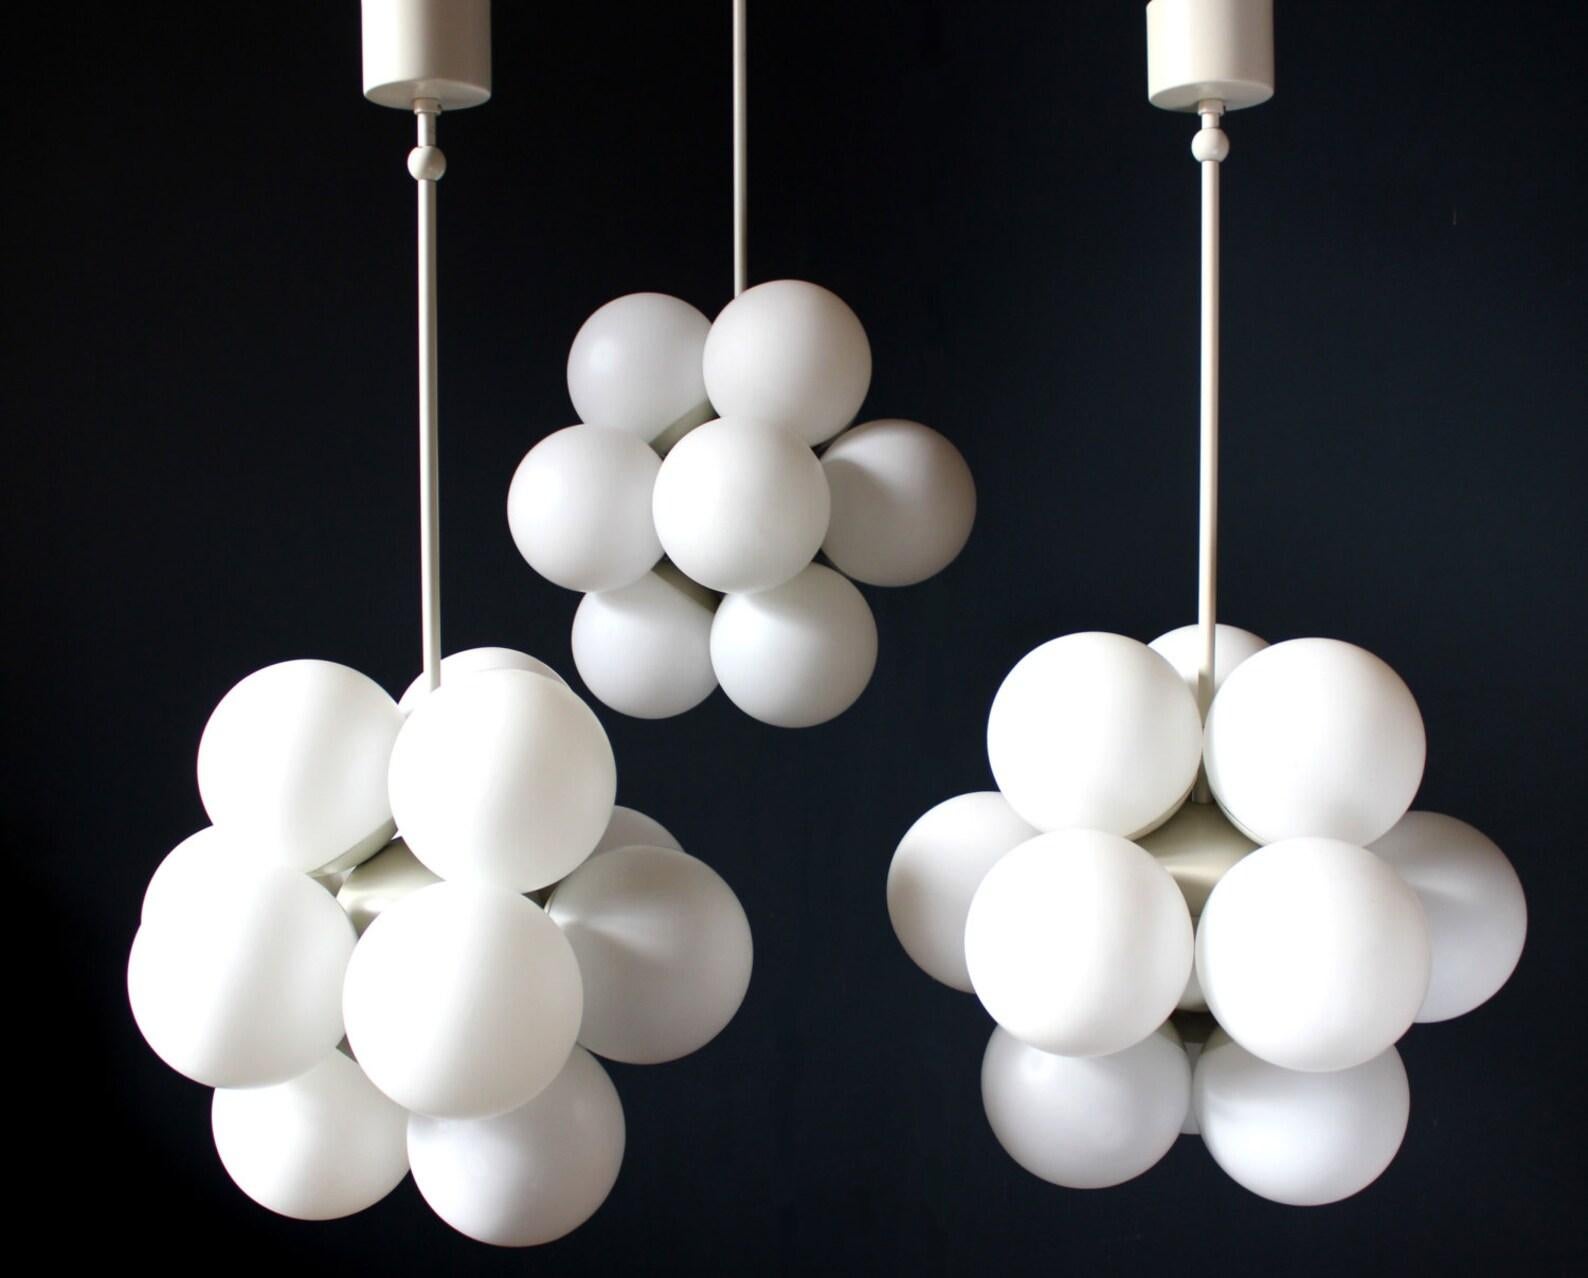 Organic chandelier 1970s with 12 (e14) opal glass globes by Kaiser
Measures: diameter 15,5